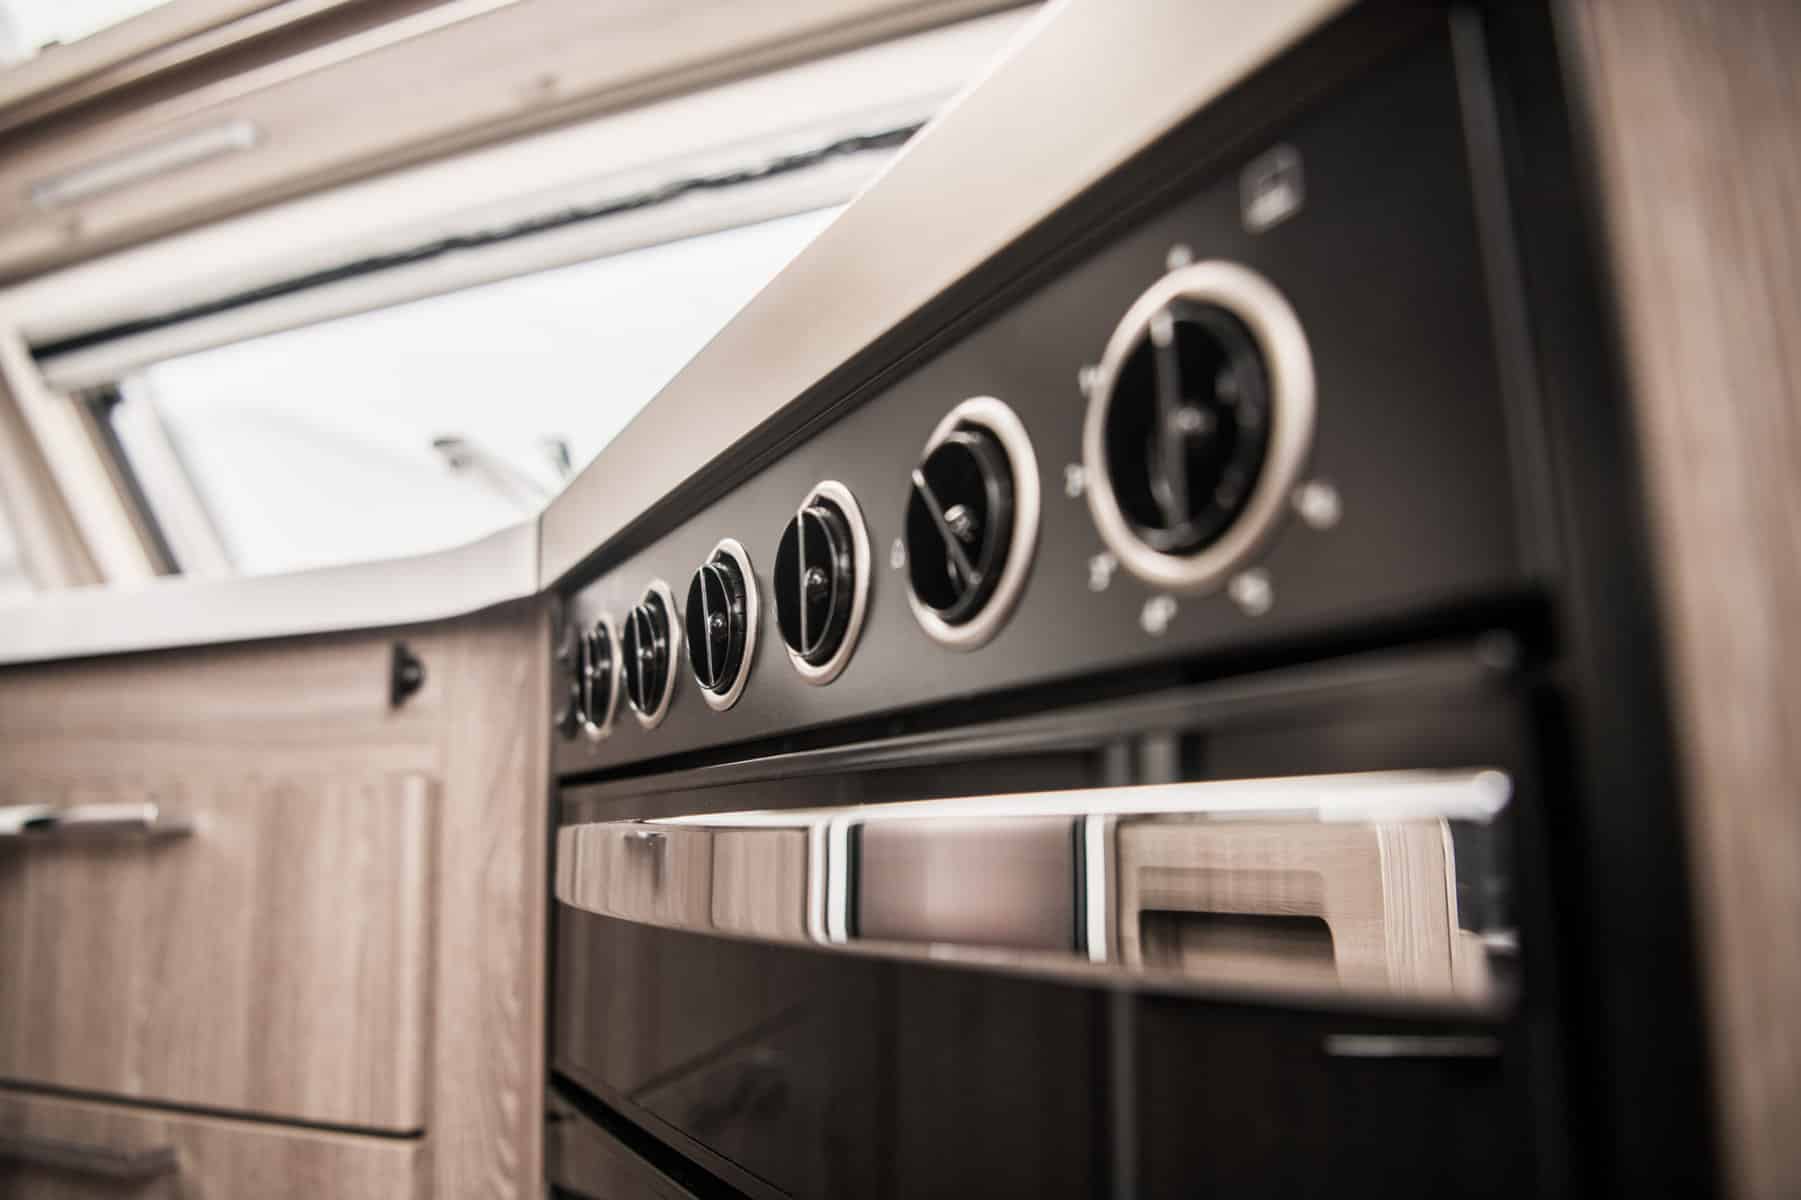 RV oven guide to baking (Image: Shutterstock)